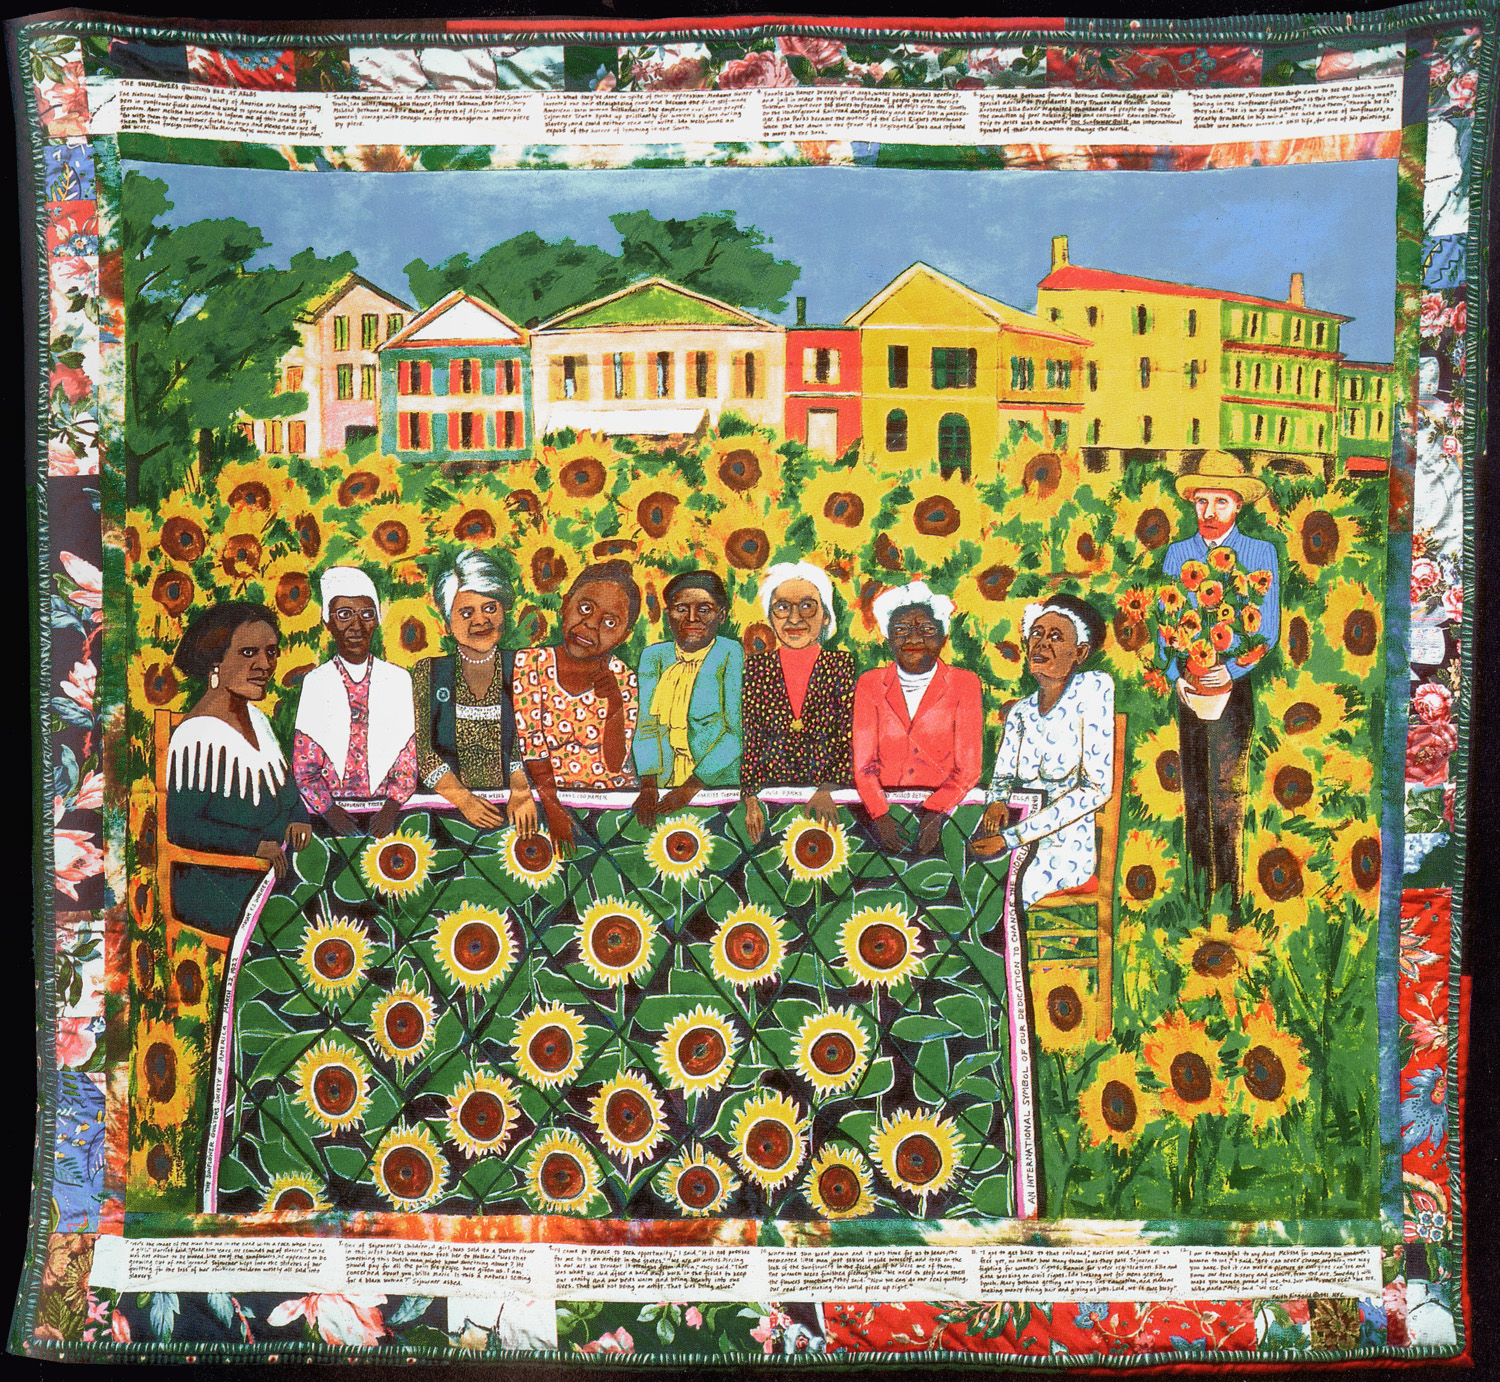 On View Now: “The Art of Faith Ringgold”